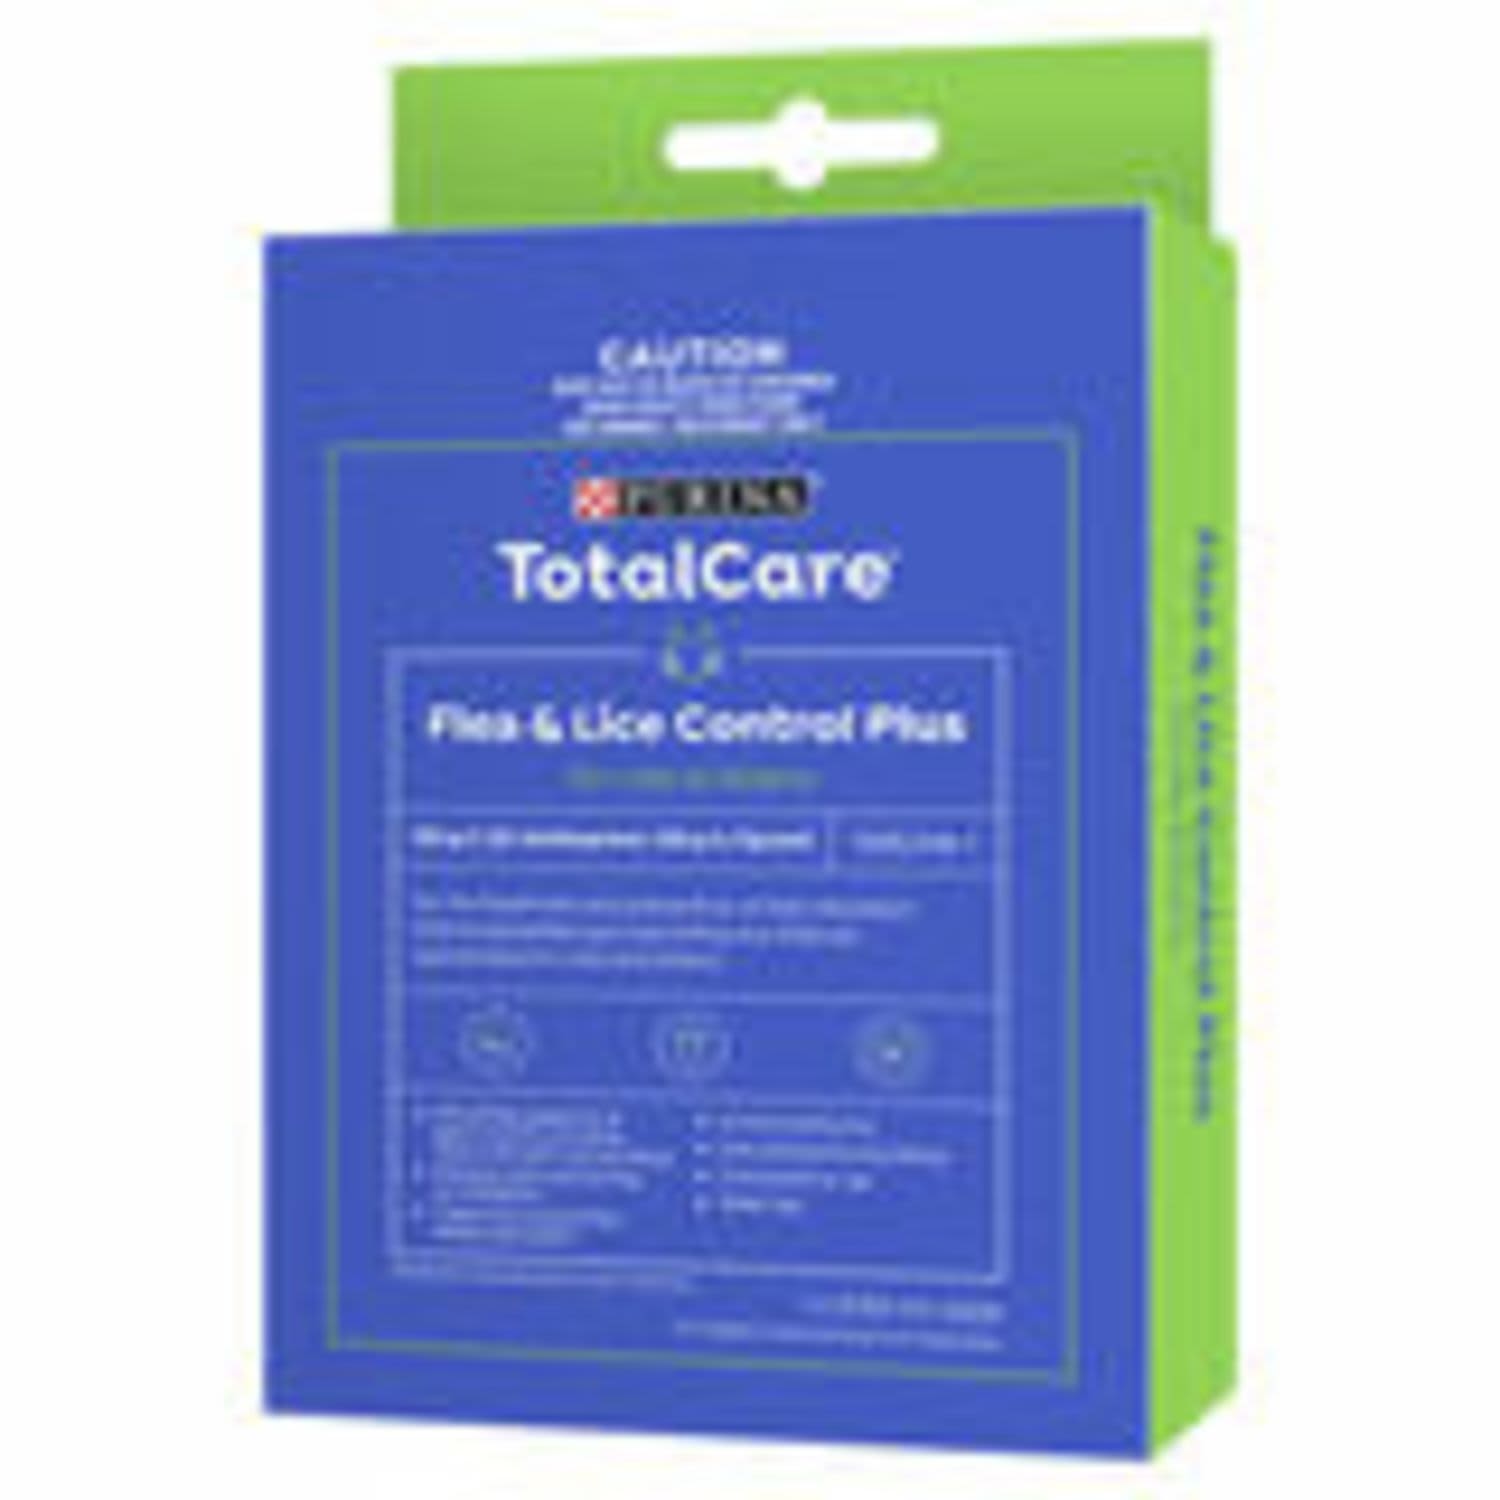 Purina Total Care Flea & Lice Control Plus for Cats & Kittens, 1 Each